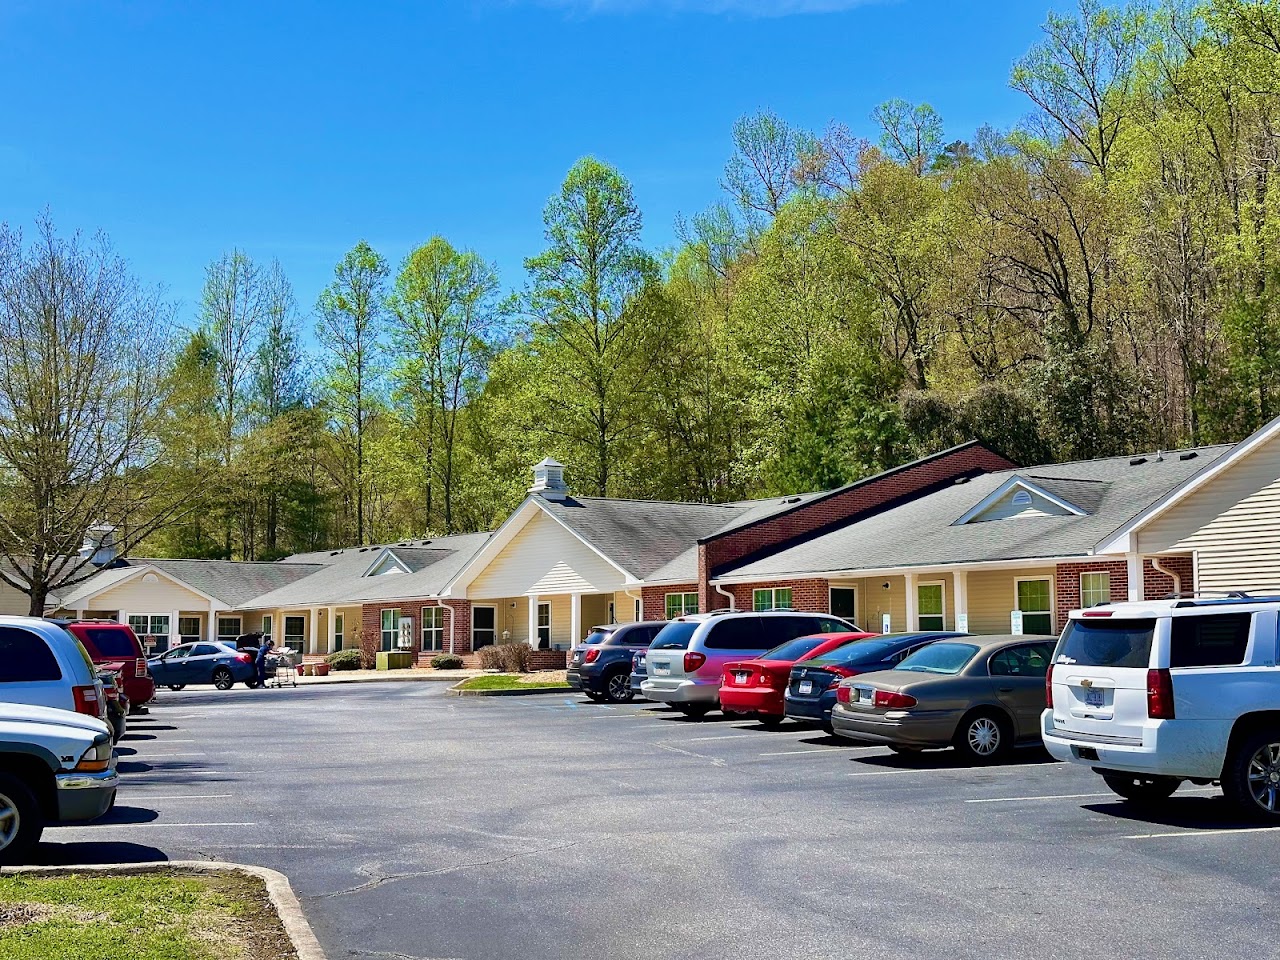 Photo of HOPEWELL VILLAGE APTS. Affordable housing located at 67 NATURAL SPRINGS RD MURPHY, NC 28906